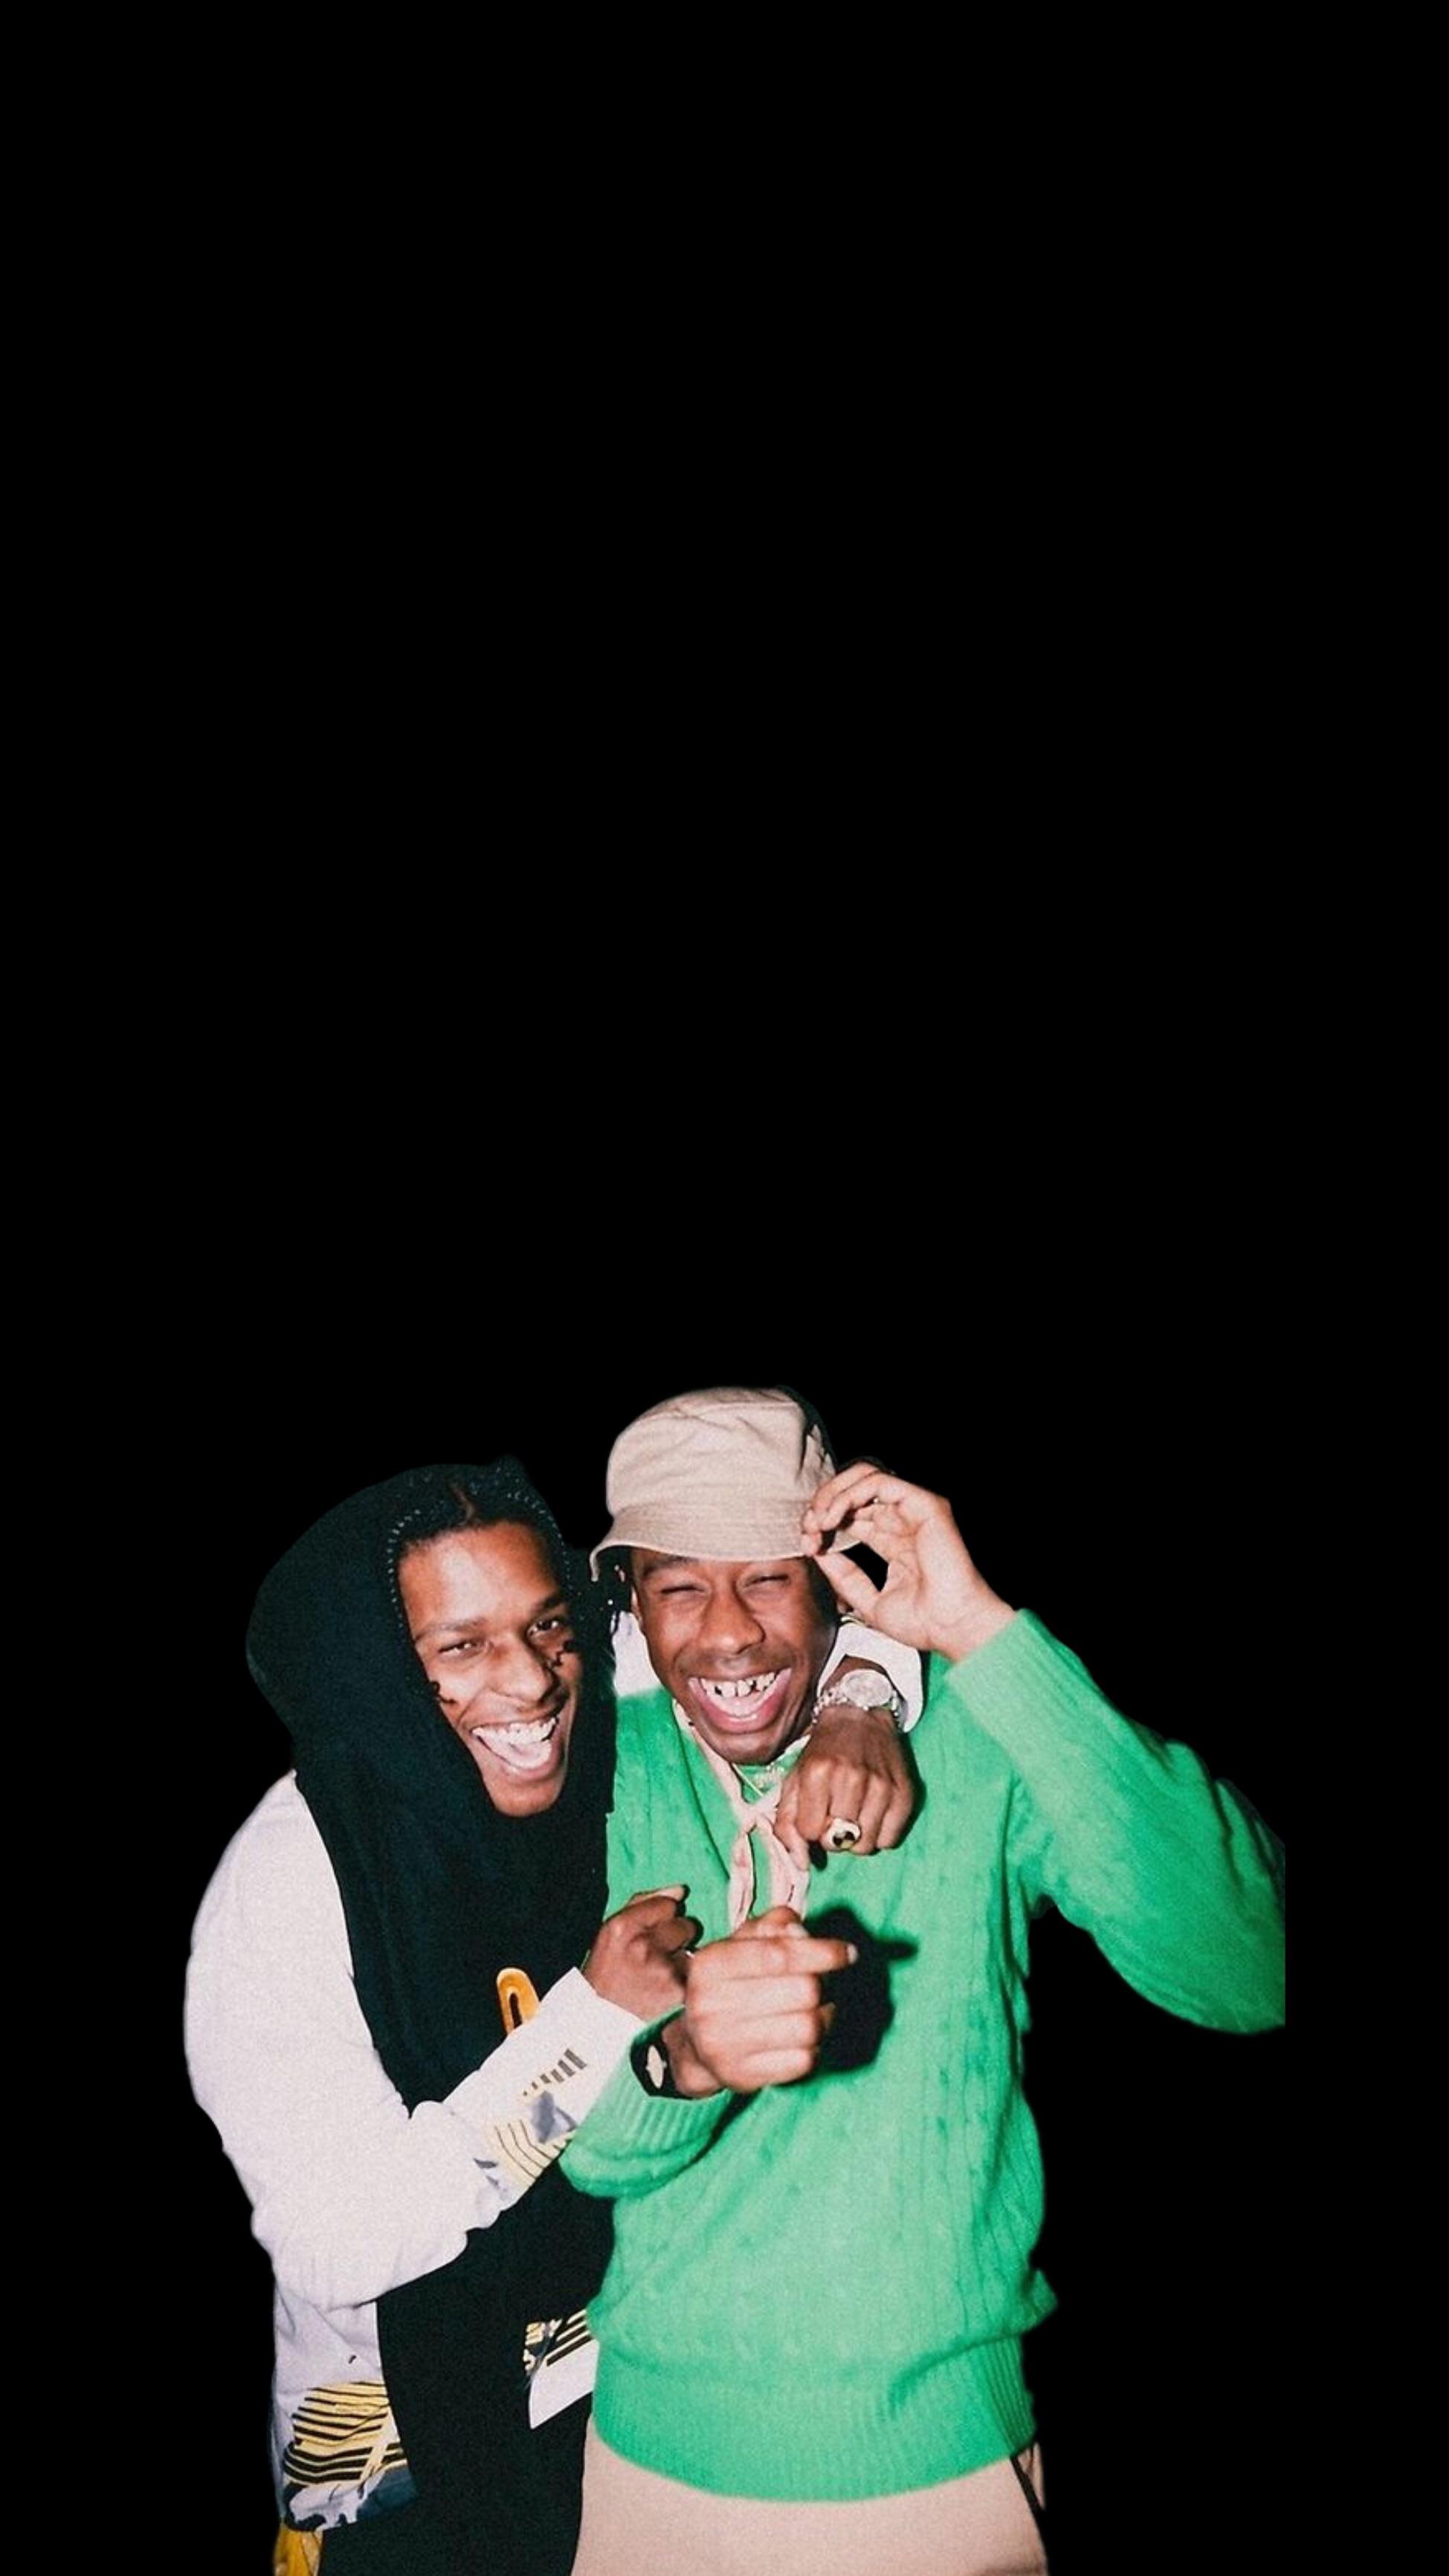 Asap Rocky and Tyler the Creator Wallpapers - Top Free Asap Rocky and Tyler  the Creator Backgrounds - WallpaperAccess